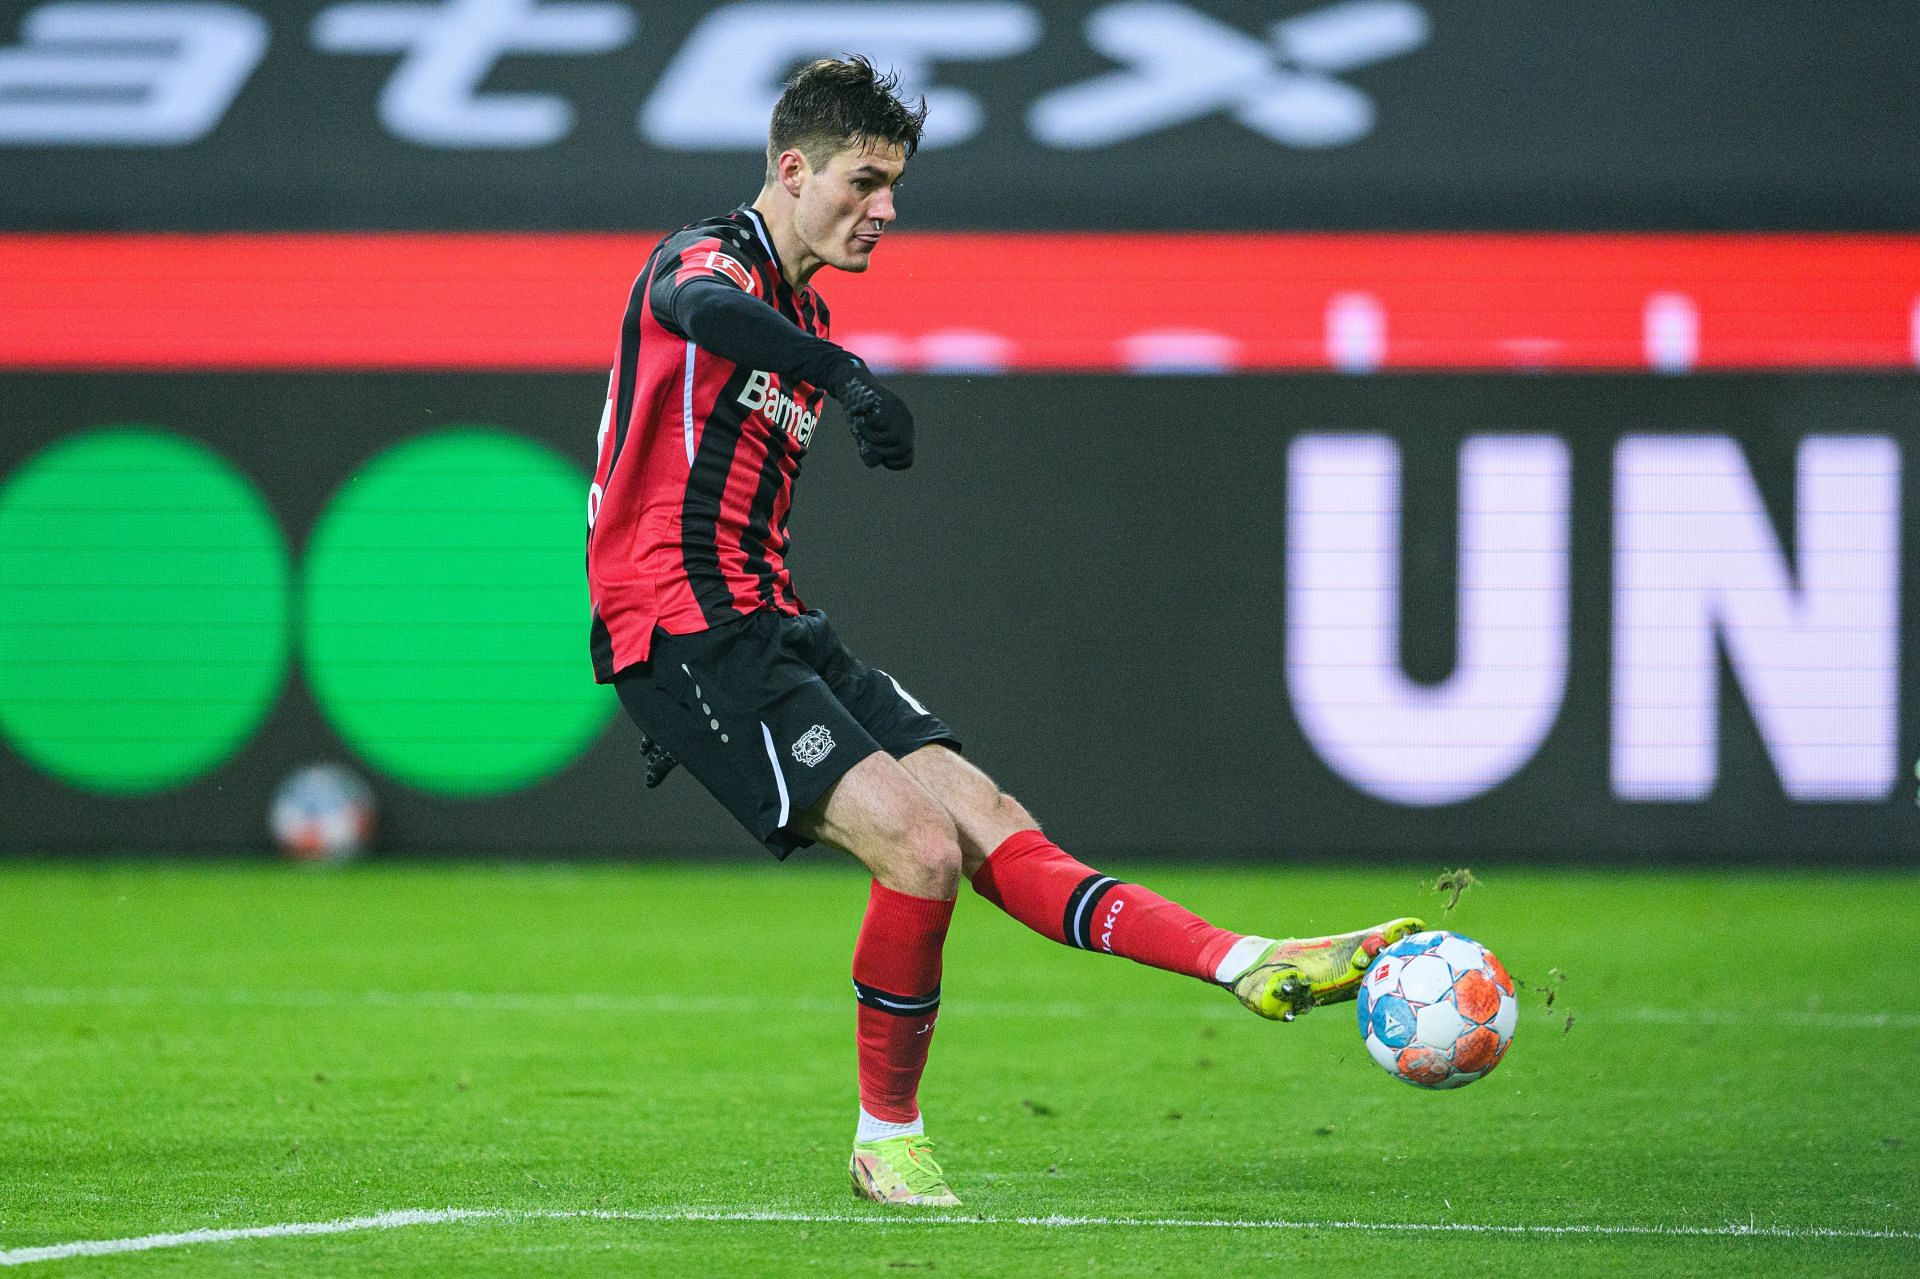 Patrick Schick has been sensational for Bayer Leverkusen and might be an excellent pick for Tottenham.